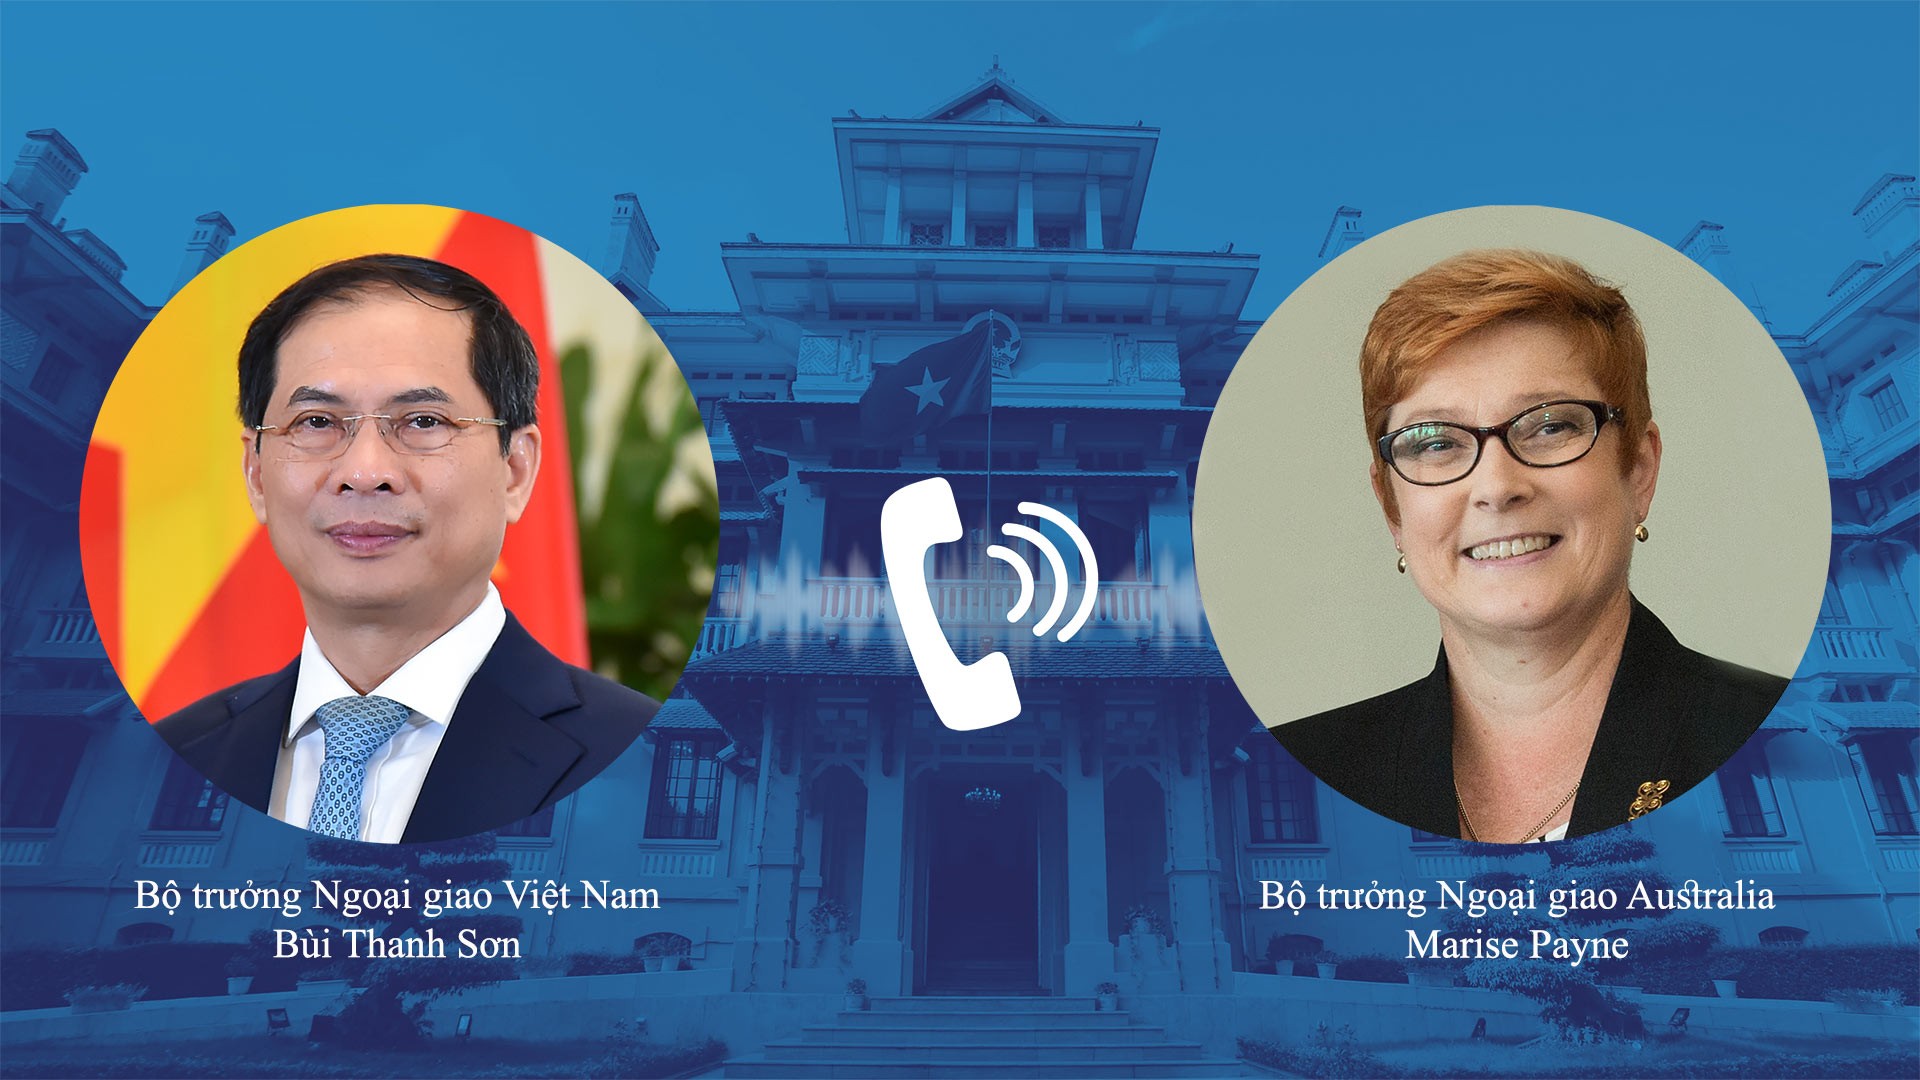 Foreign Minister Bui Thanh Son talks by phone with Australian Foreign Minister Marise Payne.